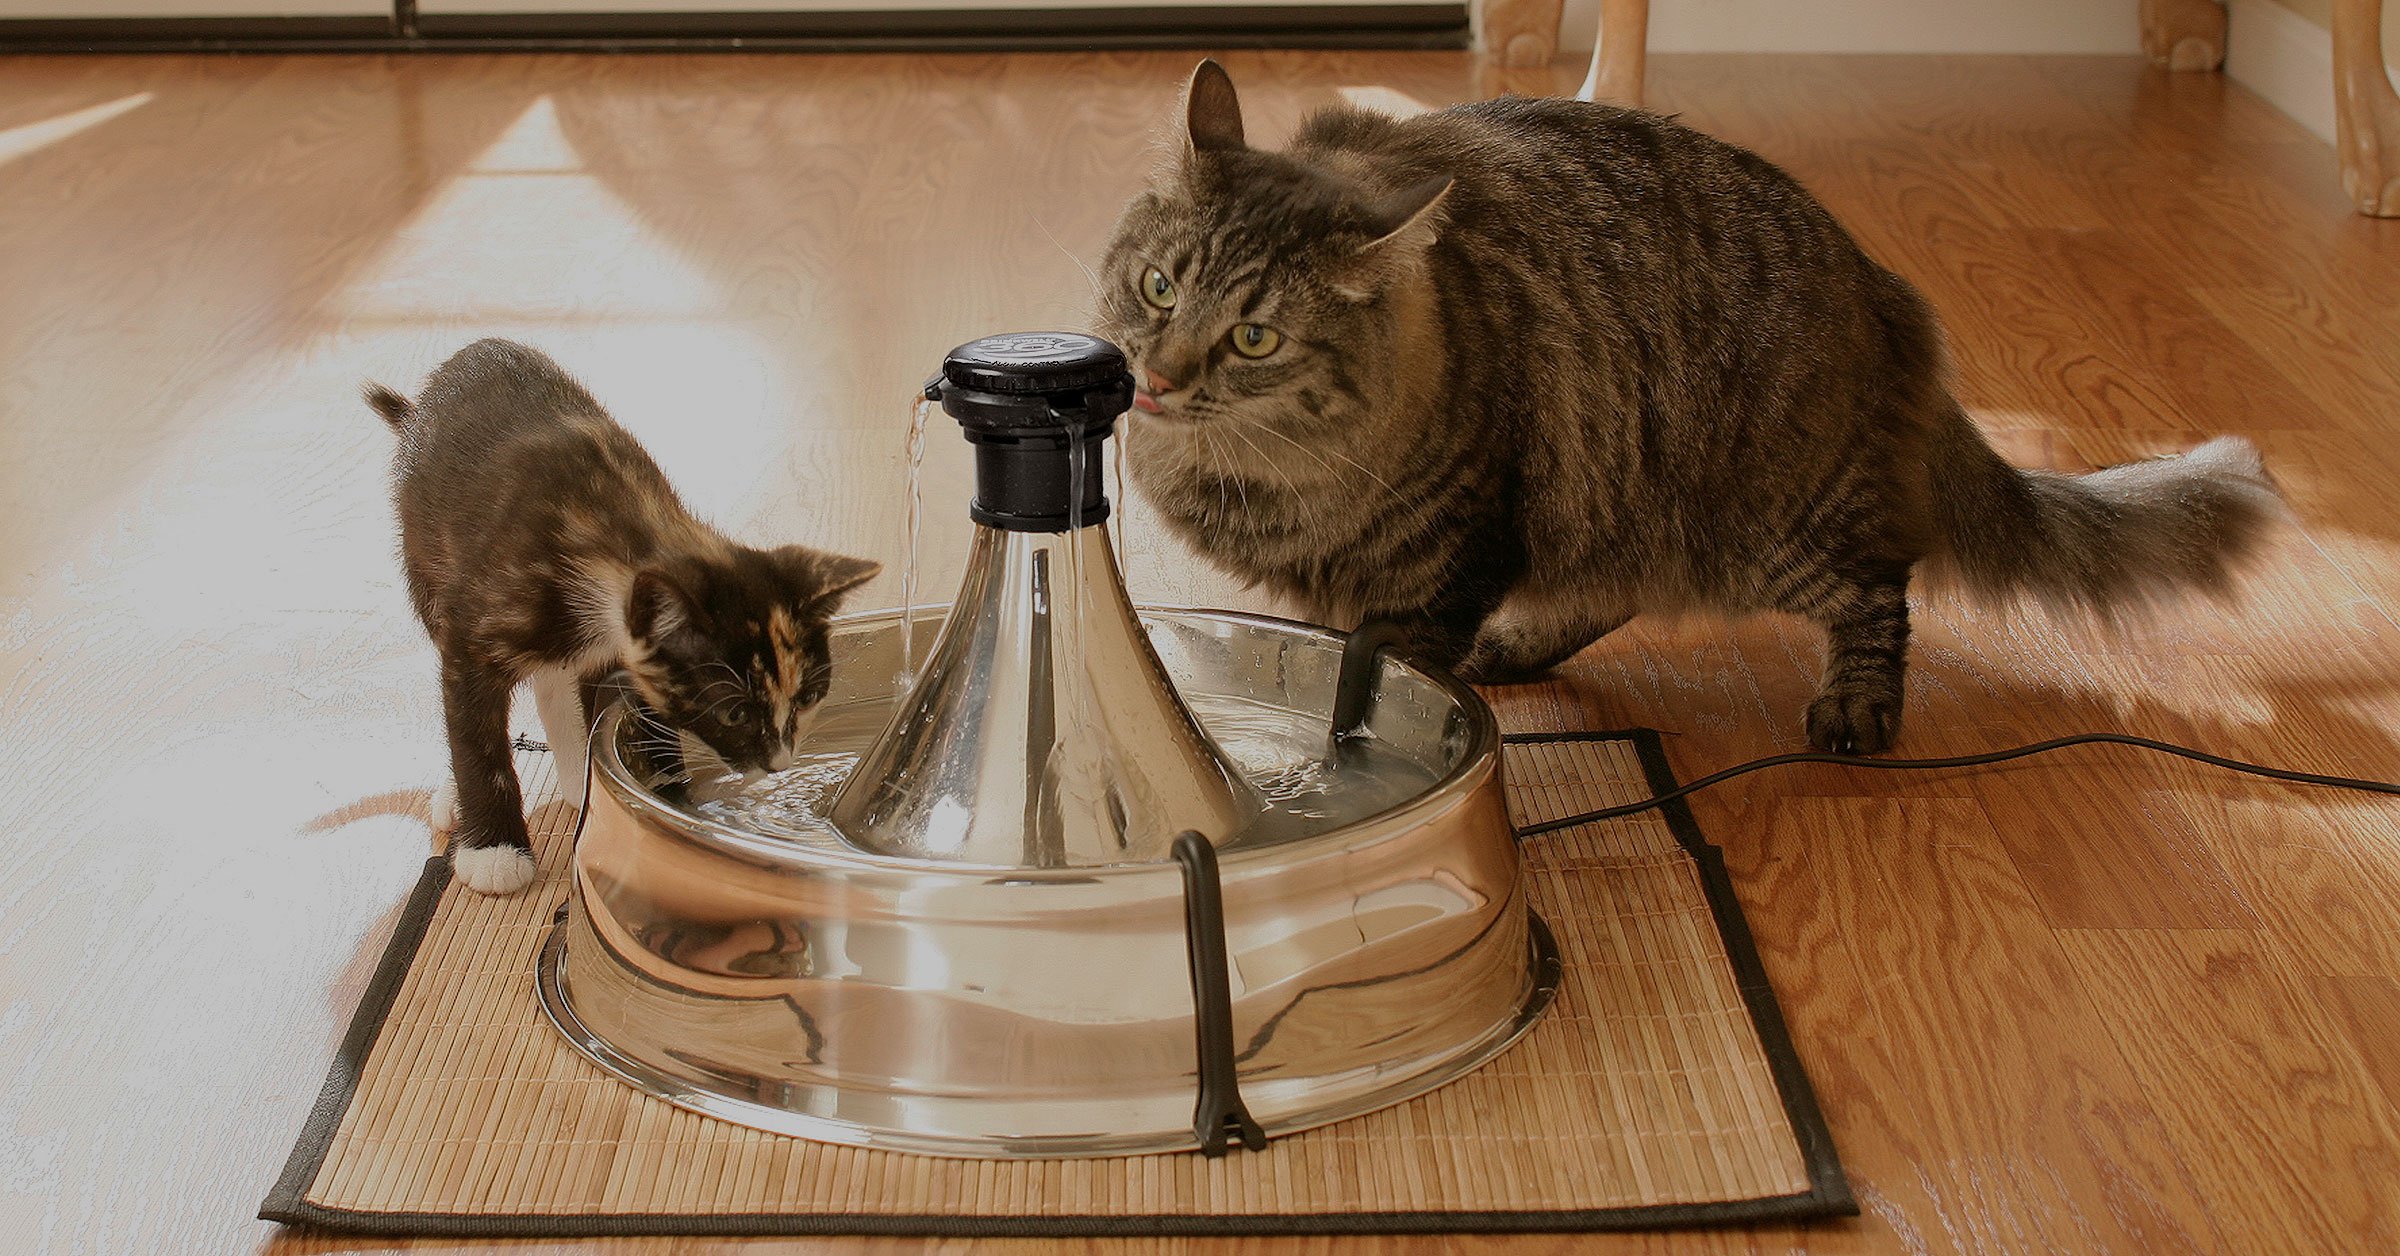 Two cats sharing the ...</div>
					</div>
					
										
									  
					<div class=